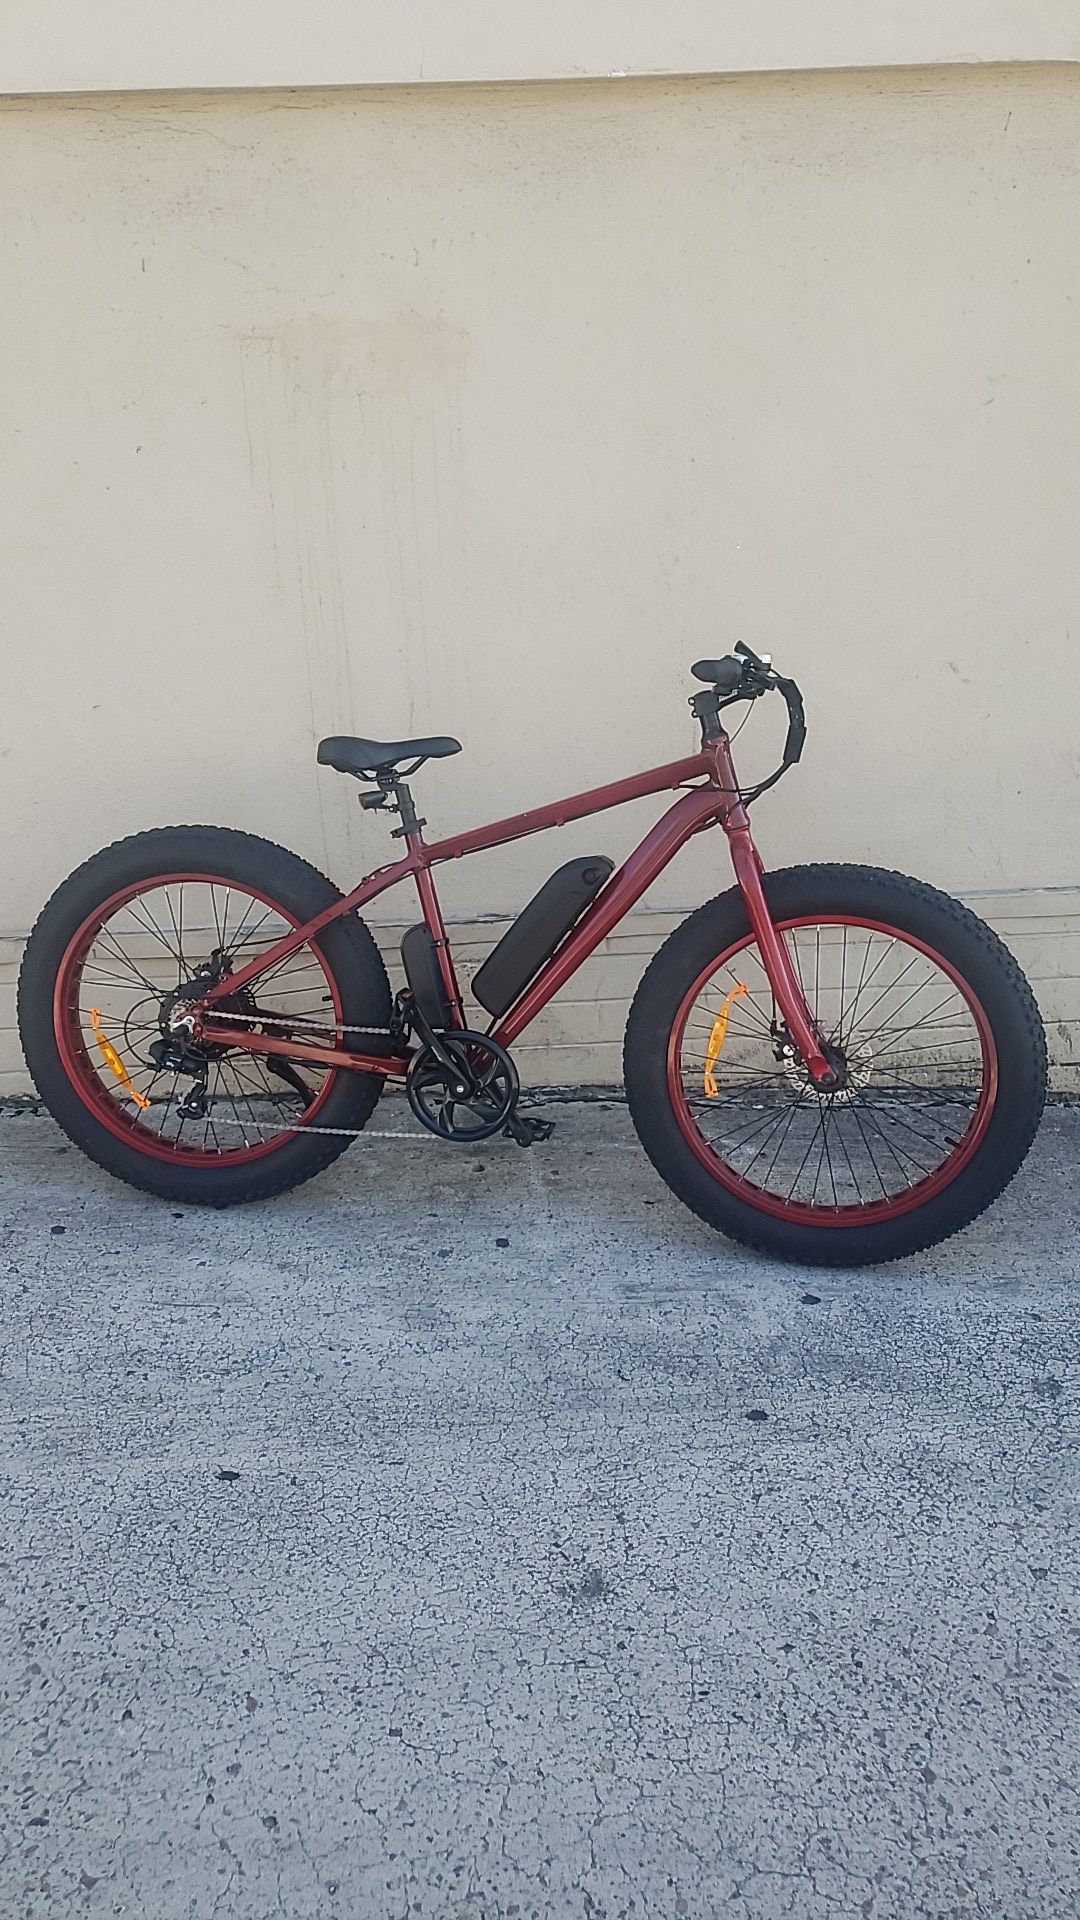 NEW Electric MT Bicycle "TJC" Burn